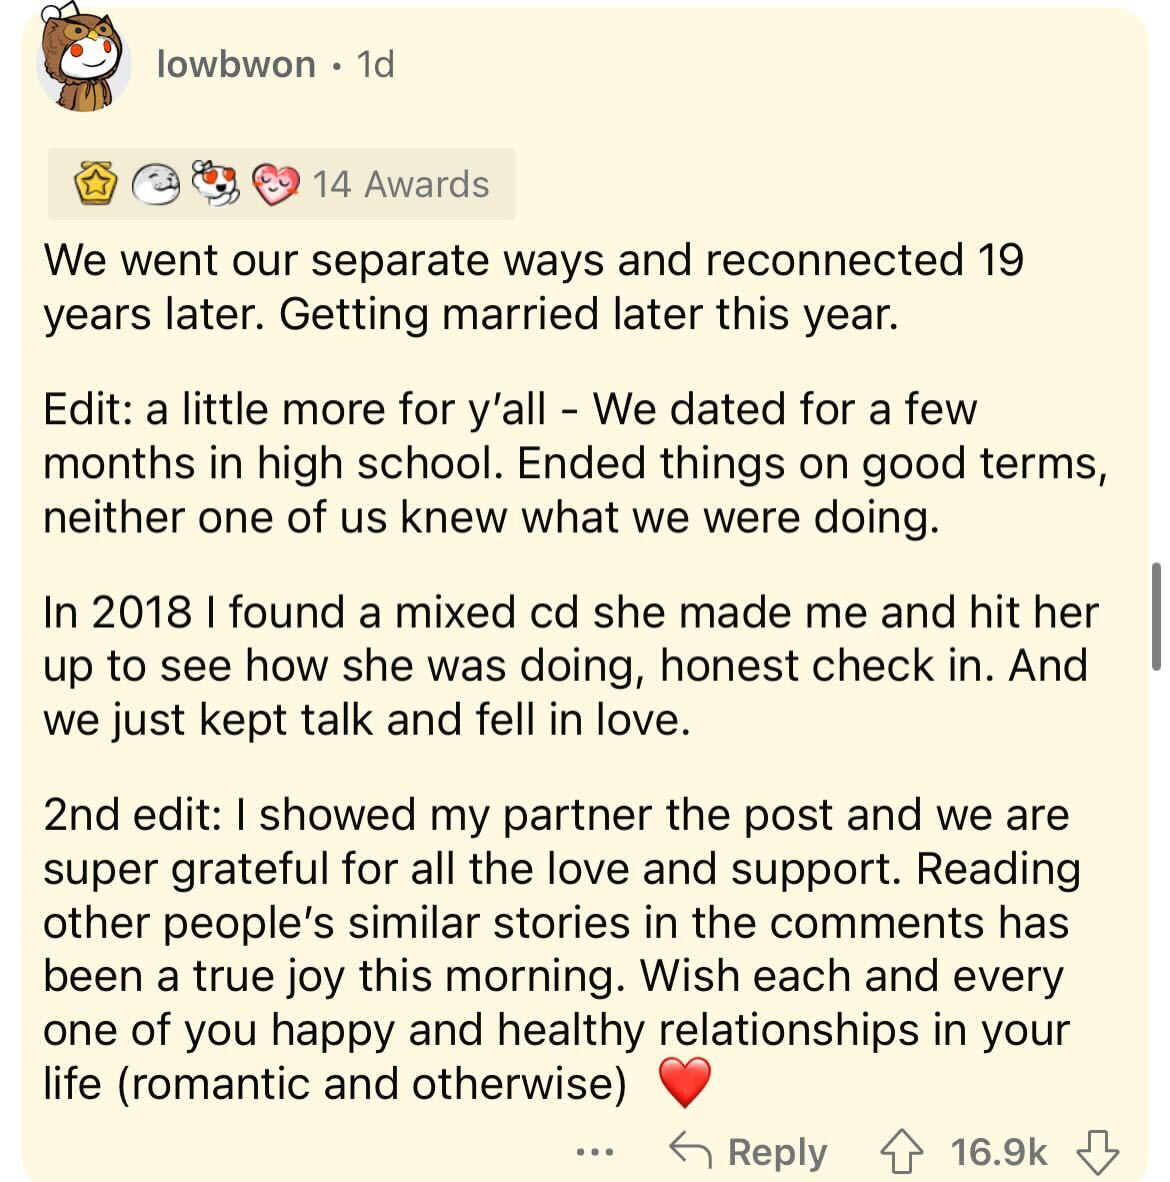 document - lowbwon 1d 14 Awards We went our separate ways and reconnected 19 years later. Getting married later this year. Edit a little more for y'all We dated for a few months in high school. Ended things on good terms, neither one of us knew what we we